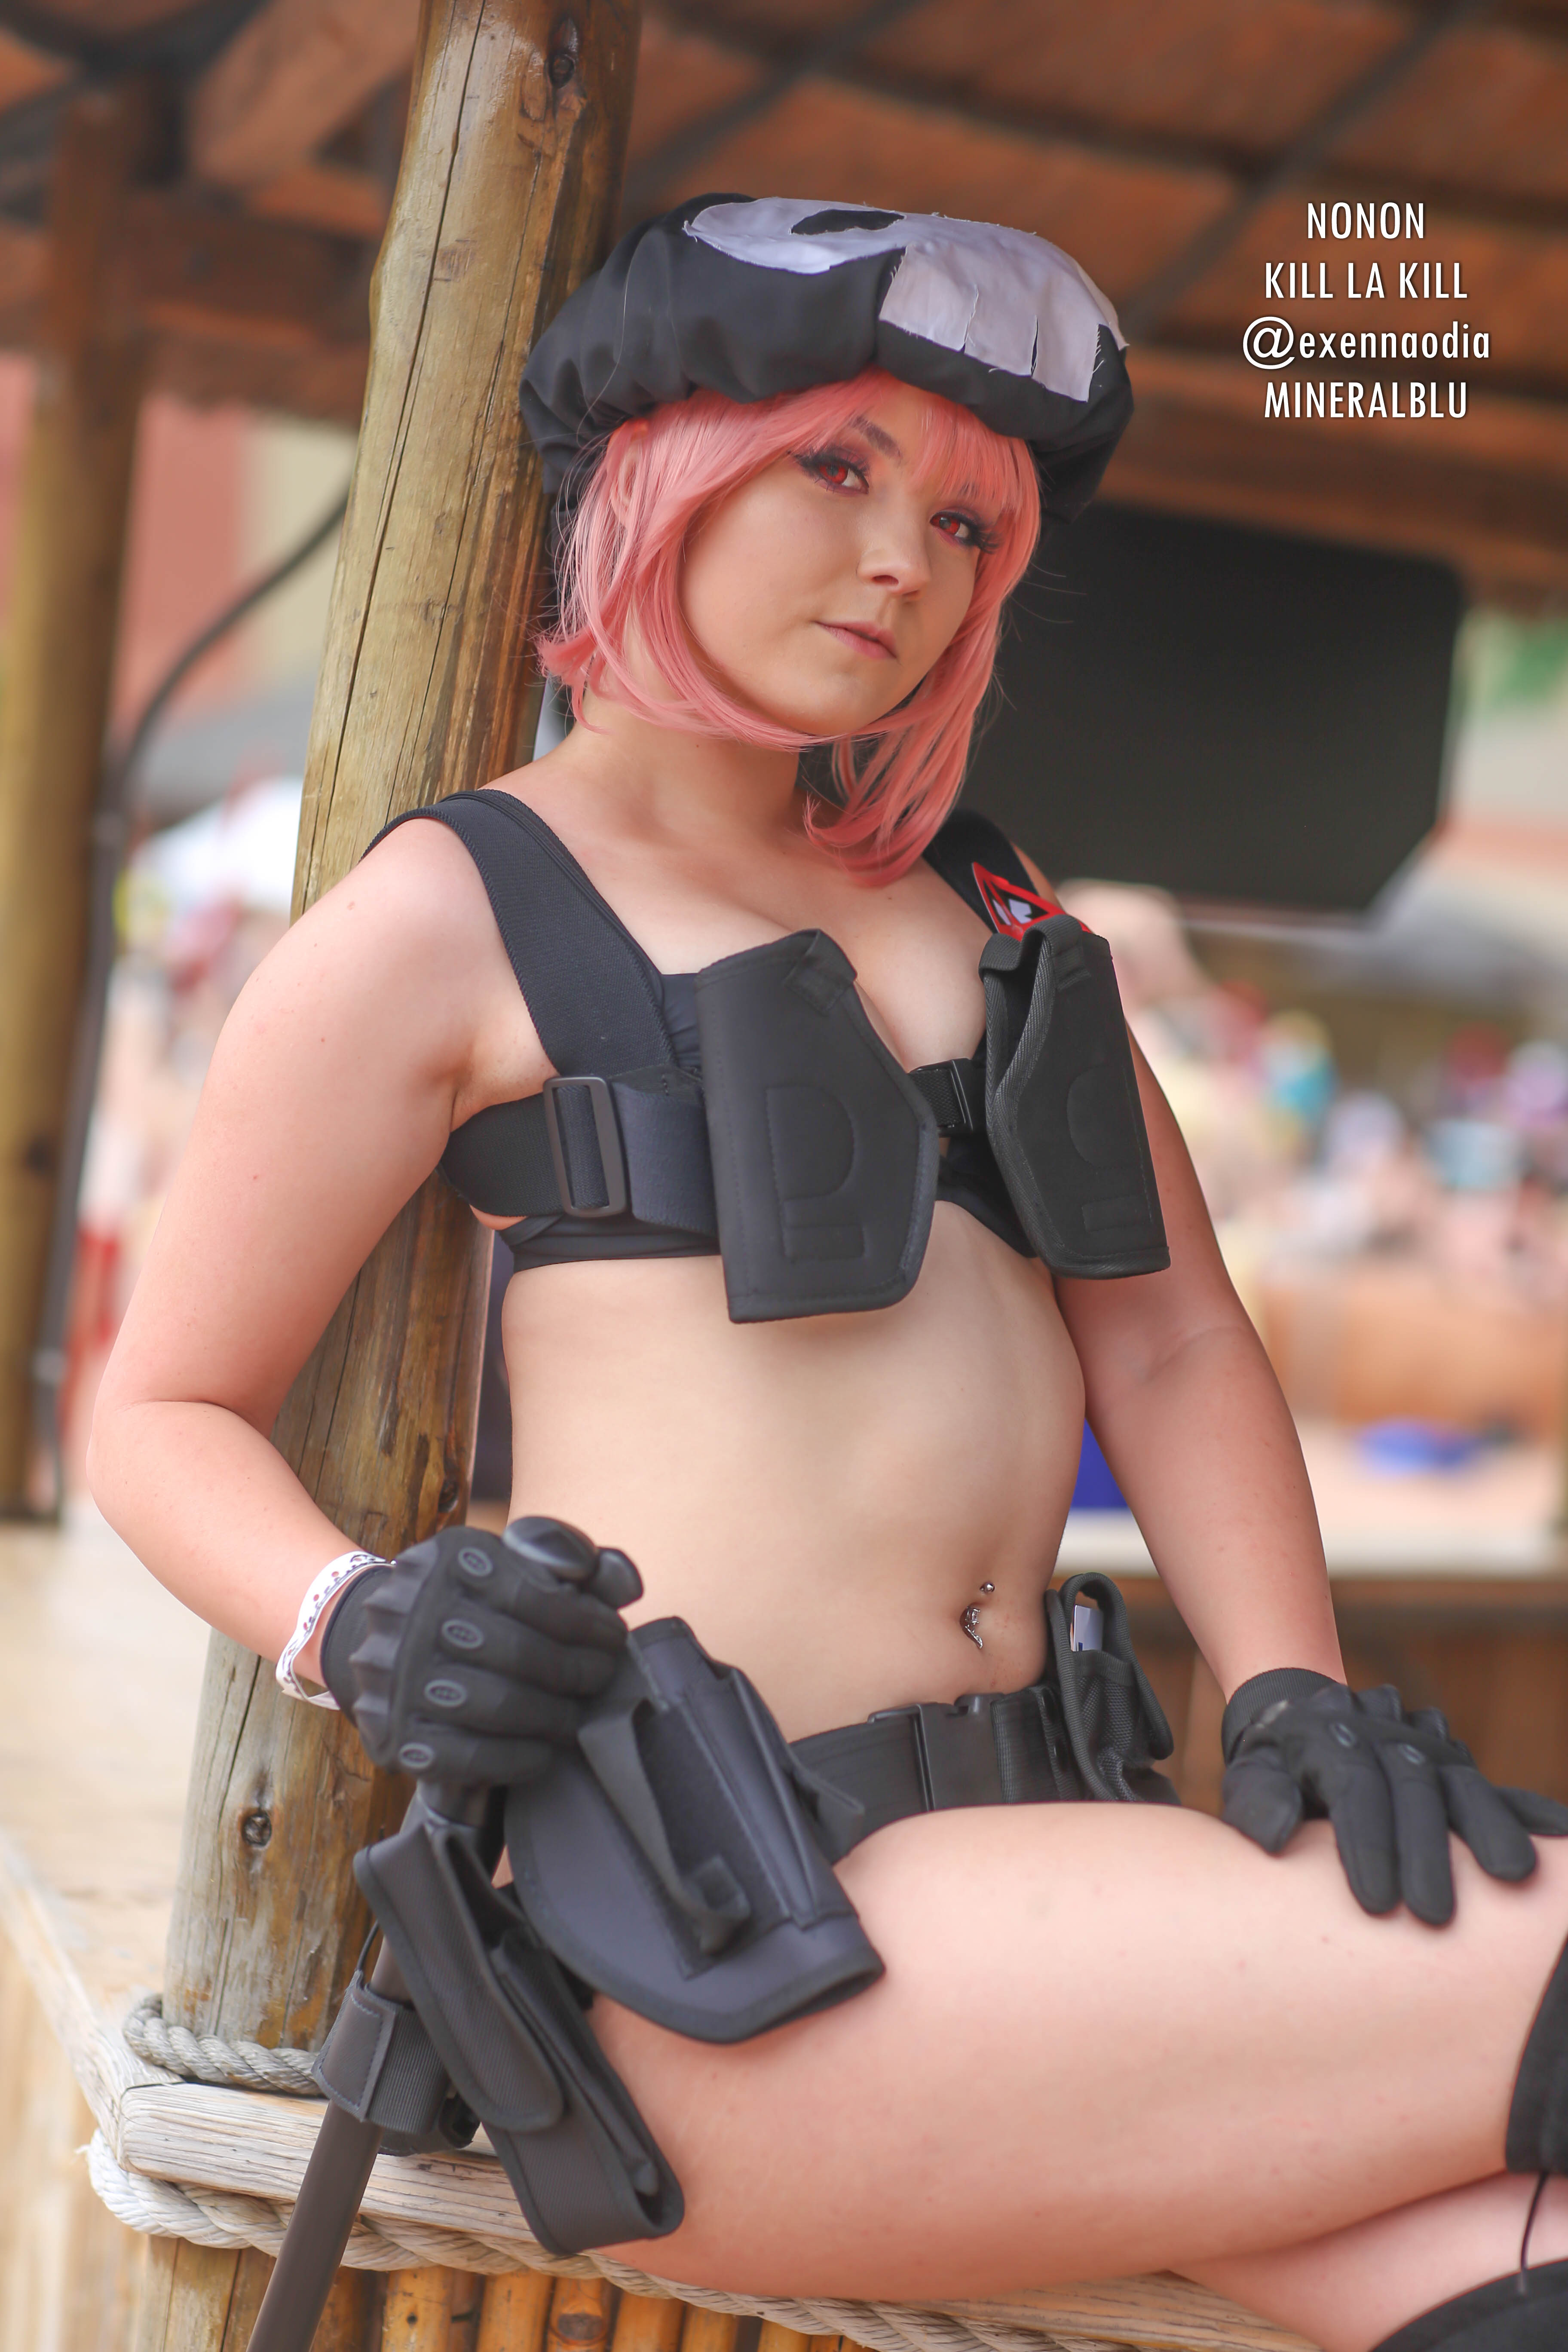 Colossalcon 2019 mineralblu cosplay coverage in partnership with kotaku.